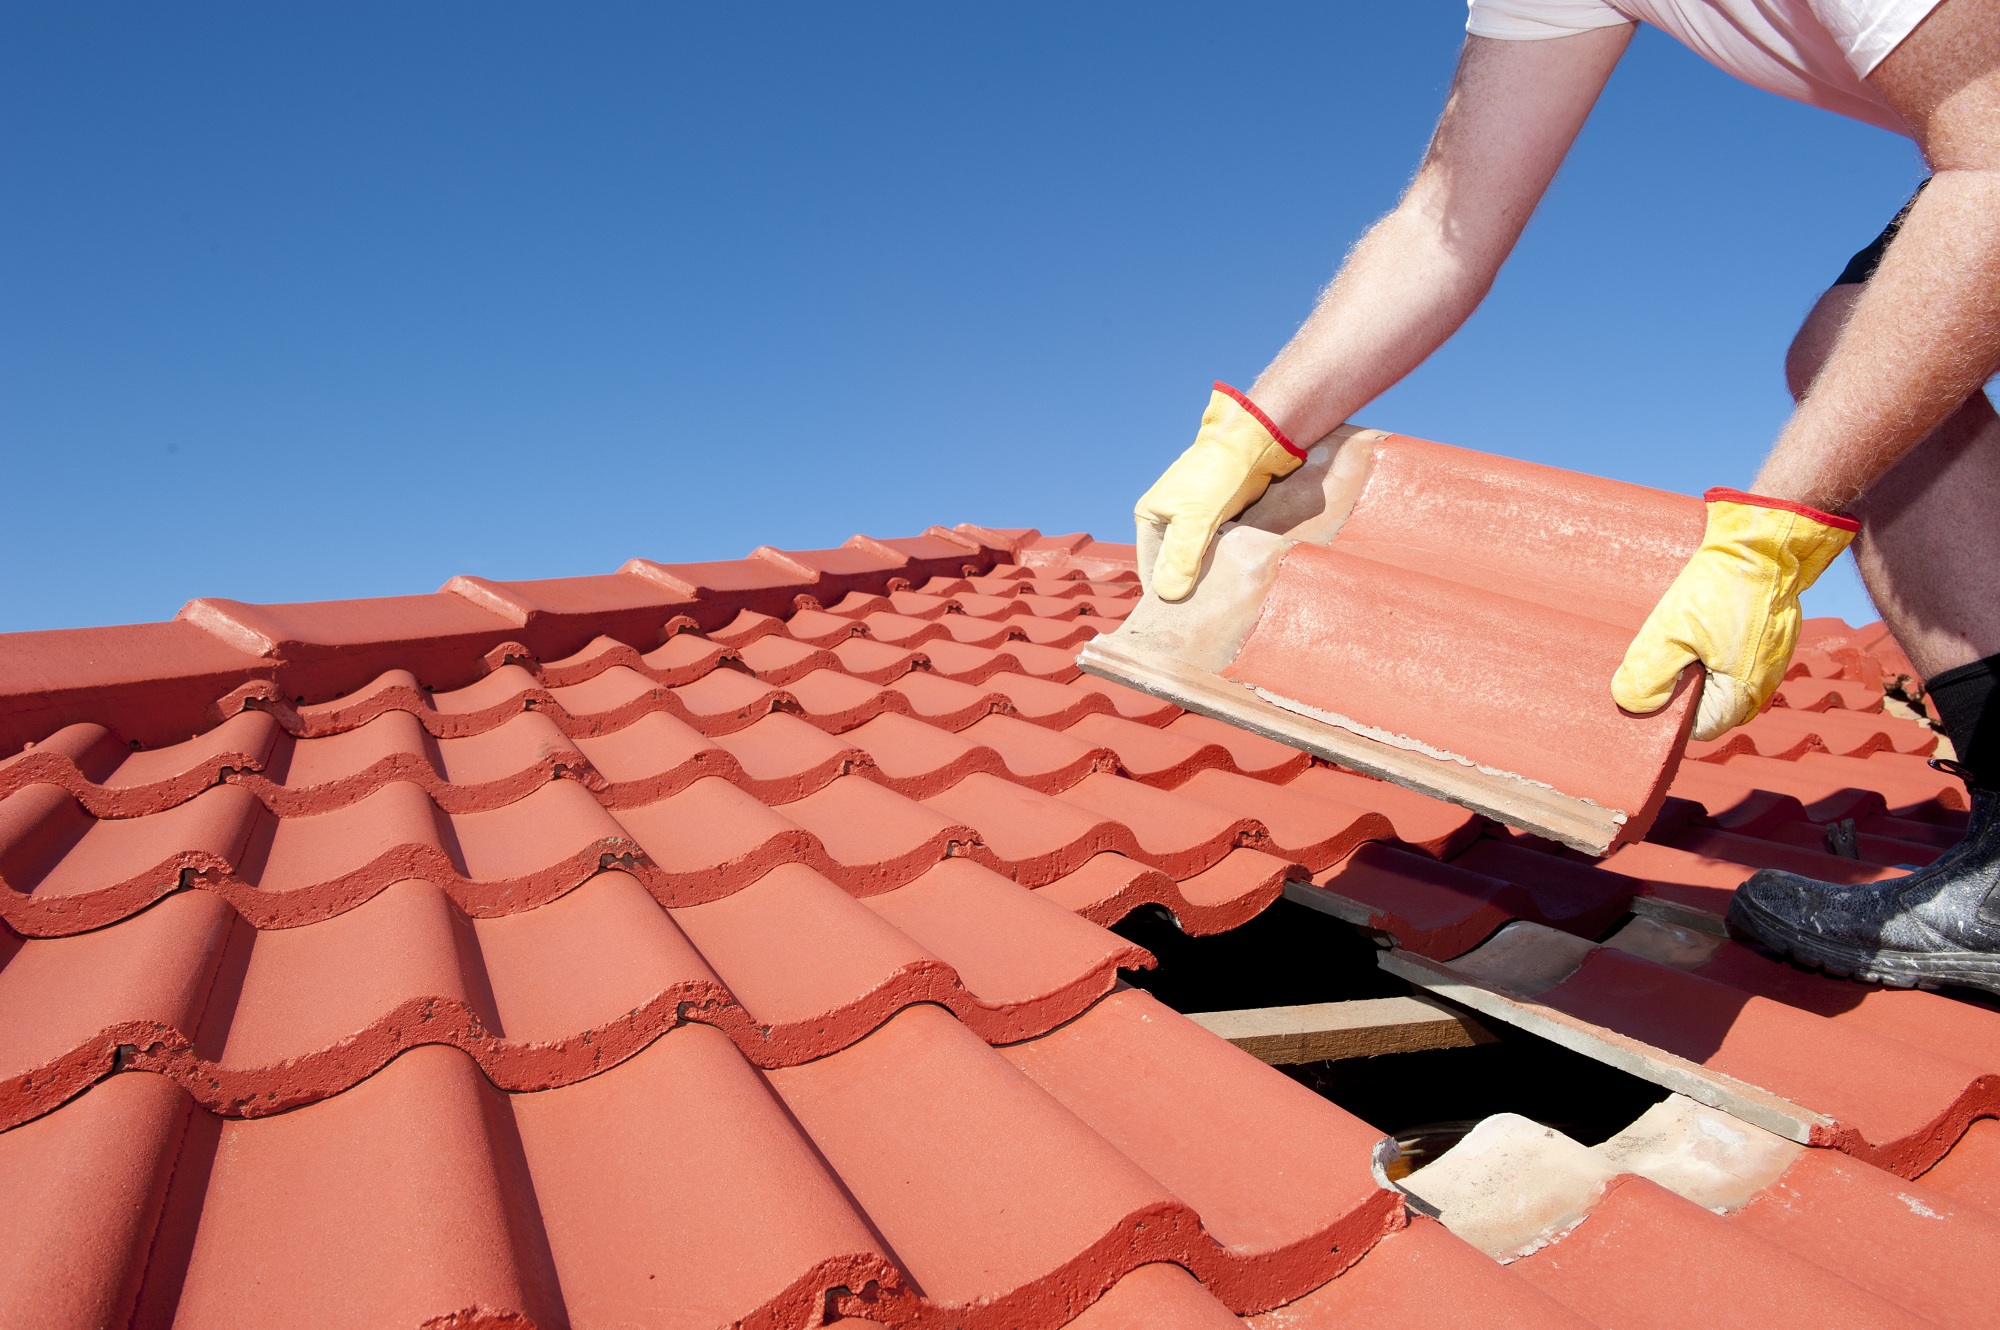 The Different Kinds of Roof & Roof Repair